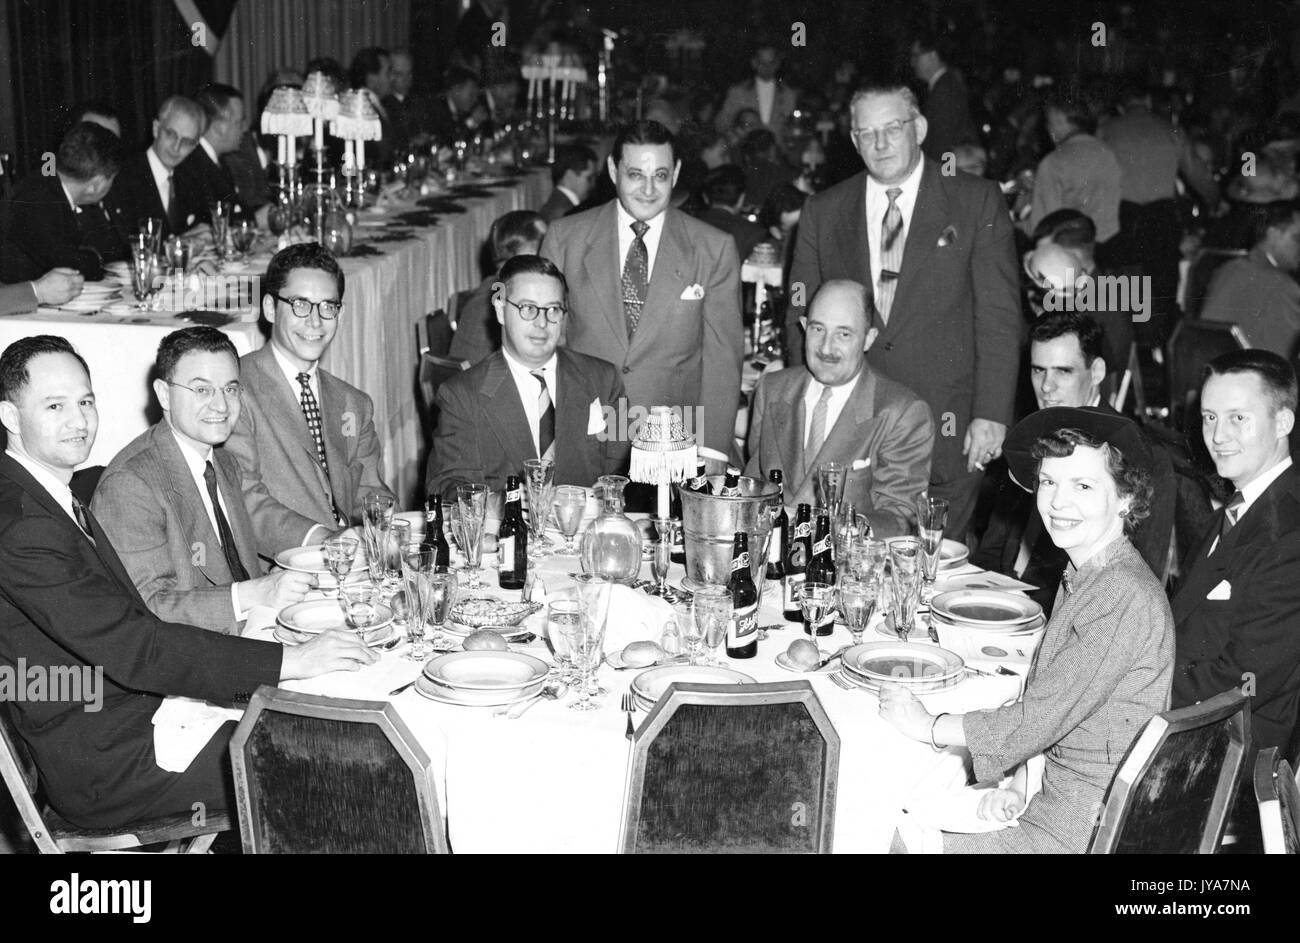 Herb Cahan, Henry Fischer, Joel Chaseman, Jack Harrington, Norman Kal, 'Mac', Ken Carten, Gray, and Tony are all dining and sitting around a circular table at an event to honor participants in the television show The Johns Hopkins Science Review, the table is covered in silverware, dishes, and beer bottles, there are many more tables behind them, 1955. Stock Photo